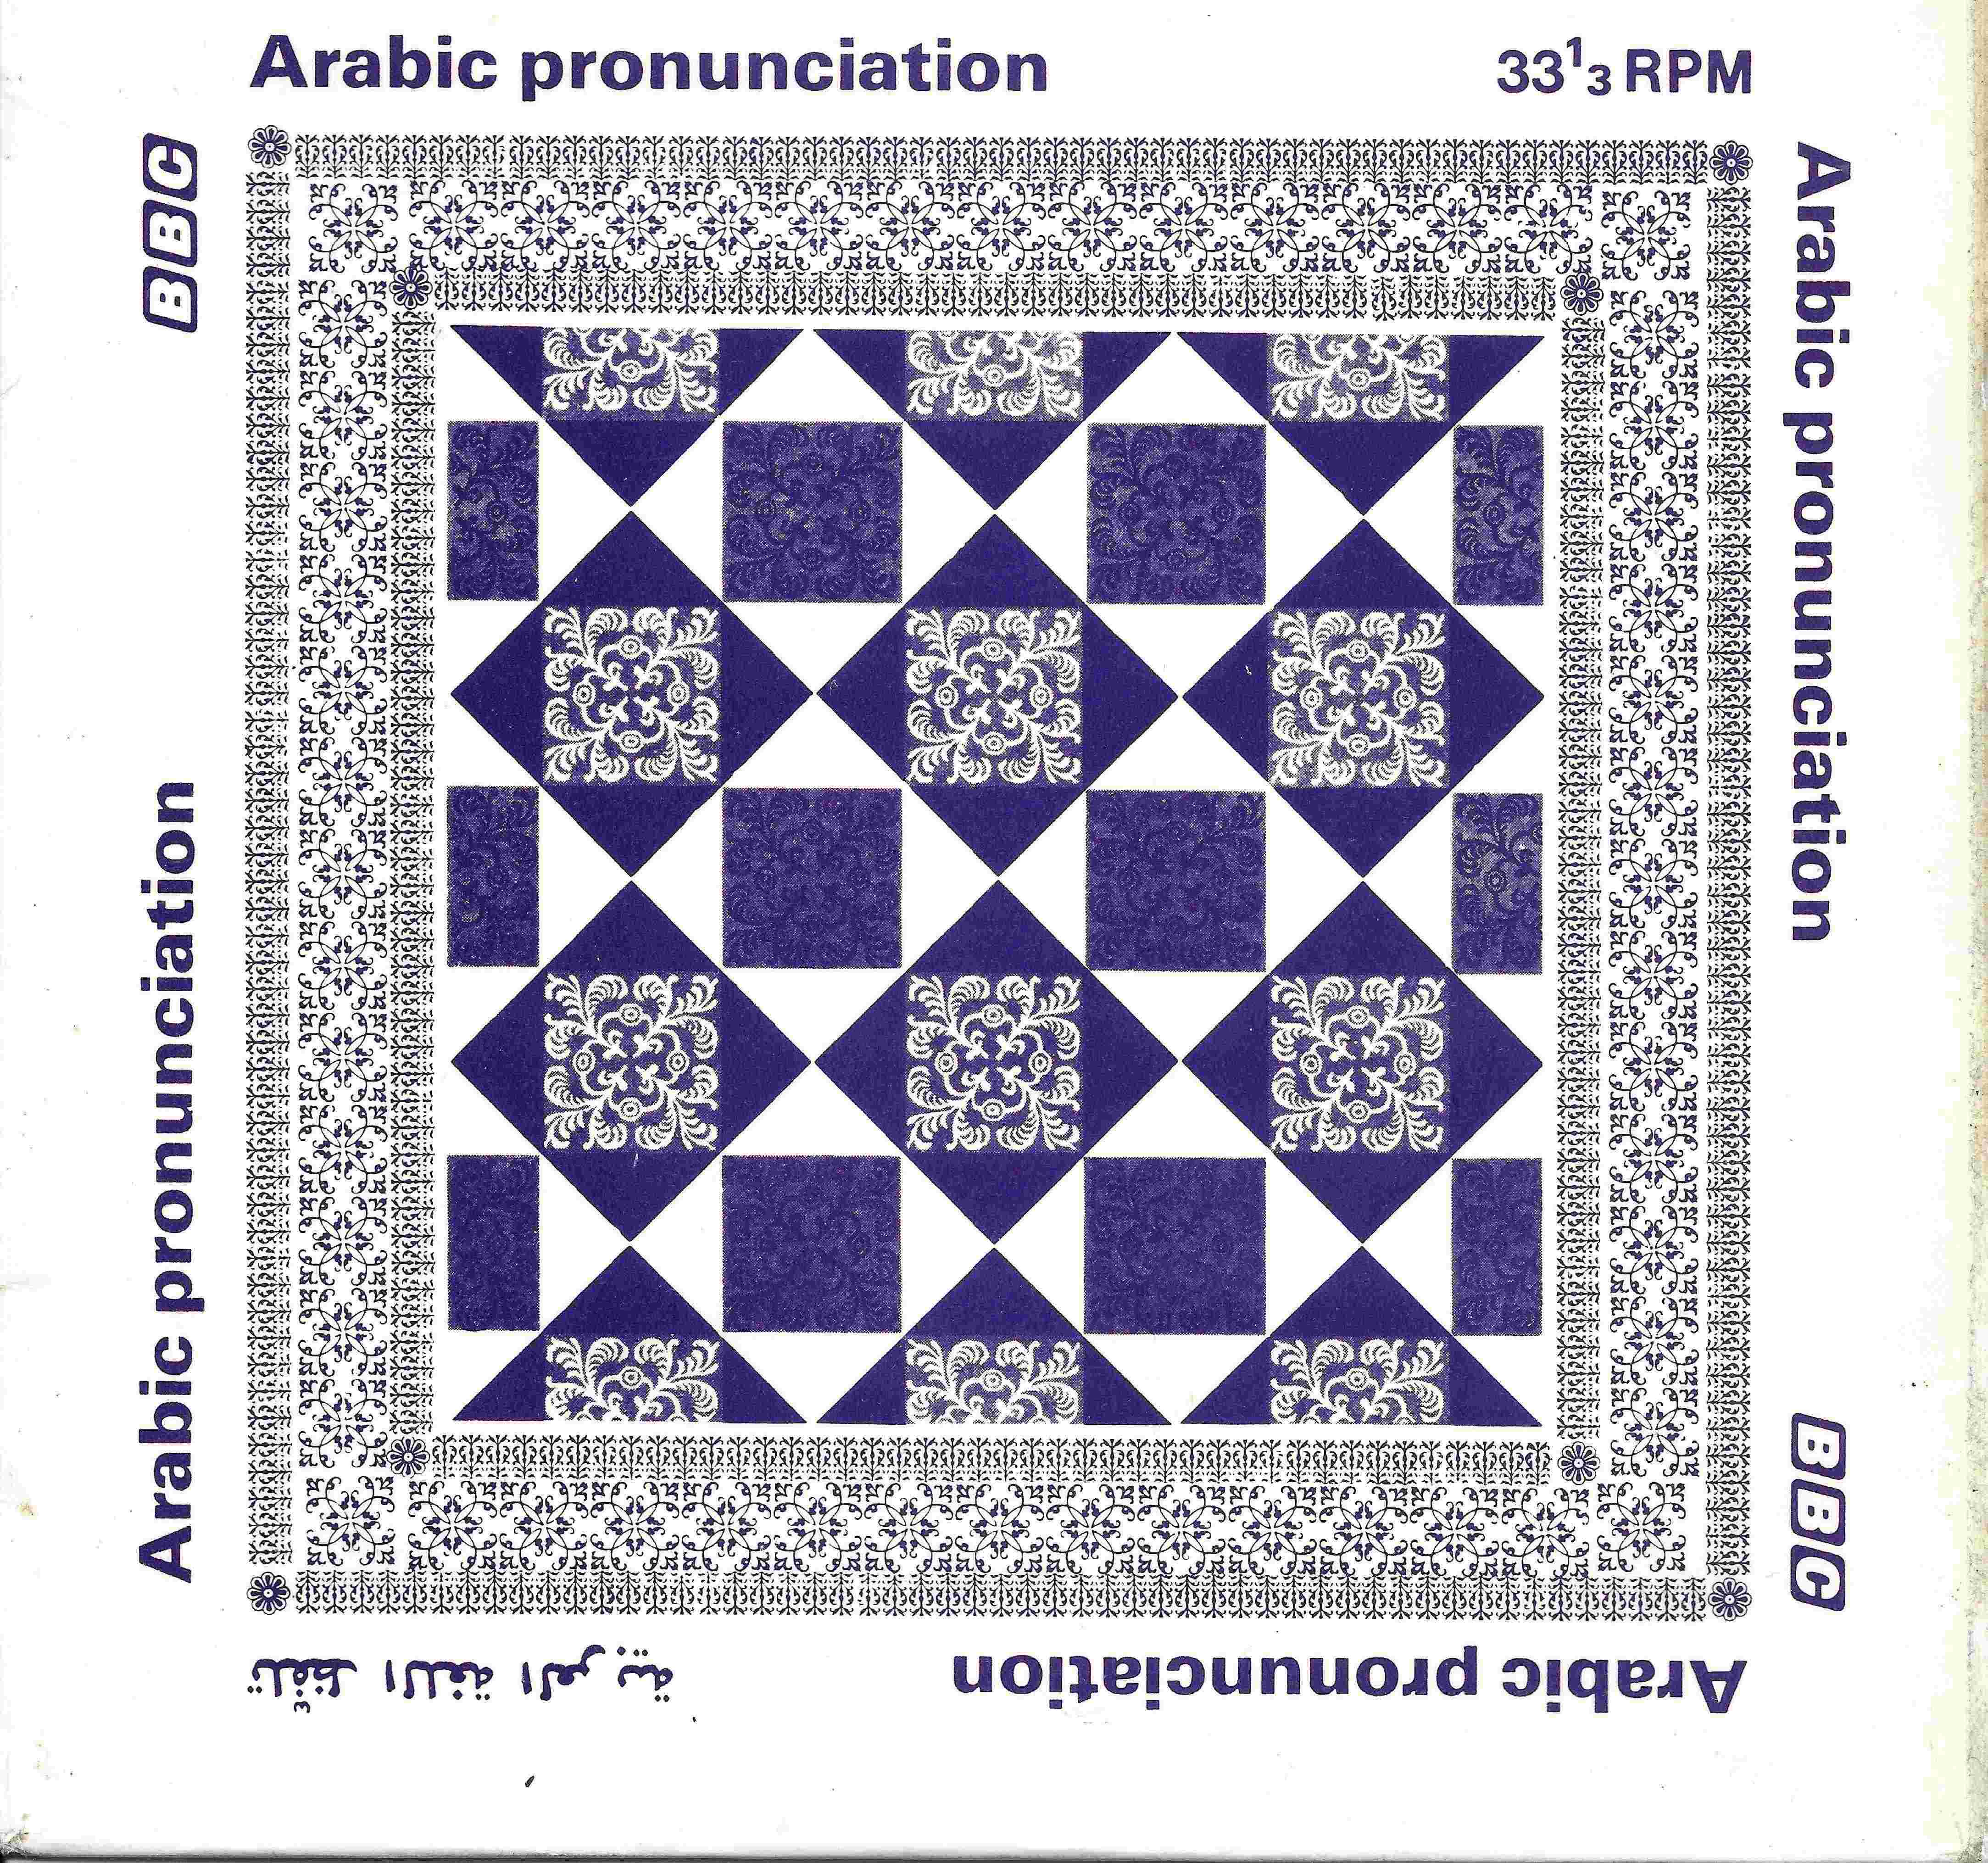 Picture of Arabic pronunciation by artist T. F. Mitchell from the BBC singles - Records and Tapes library